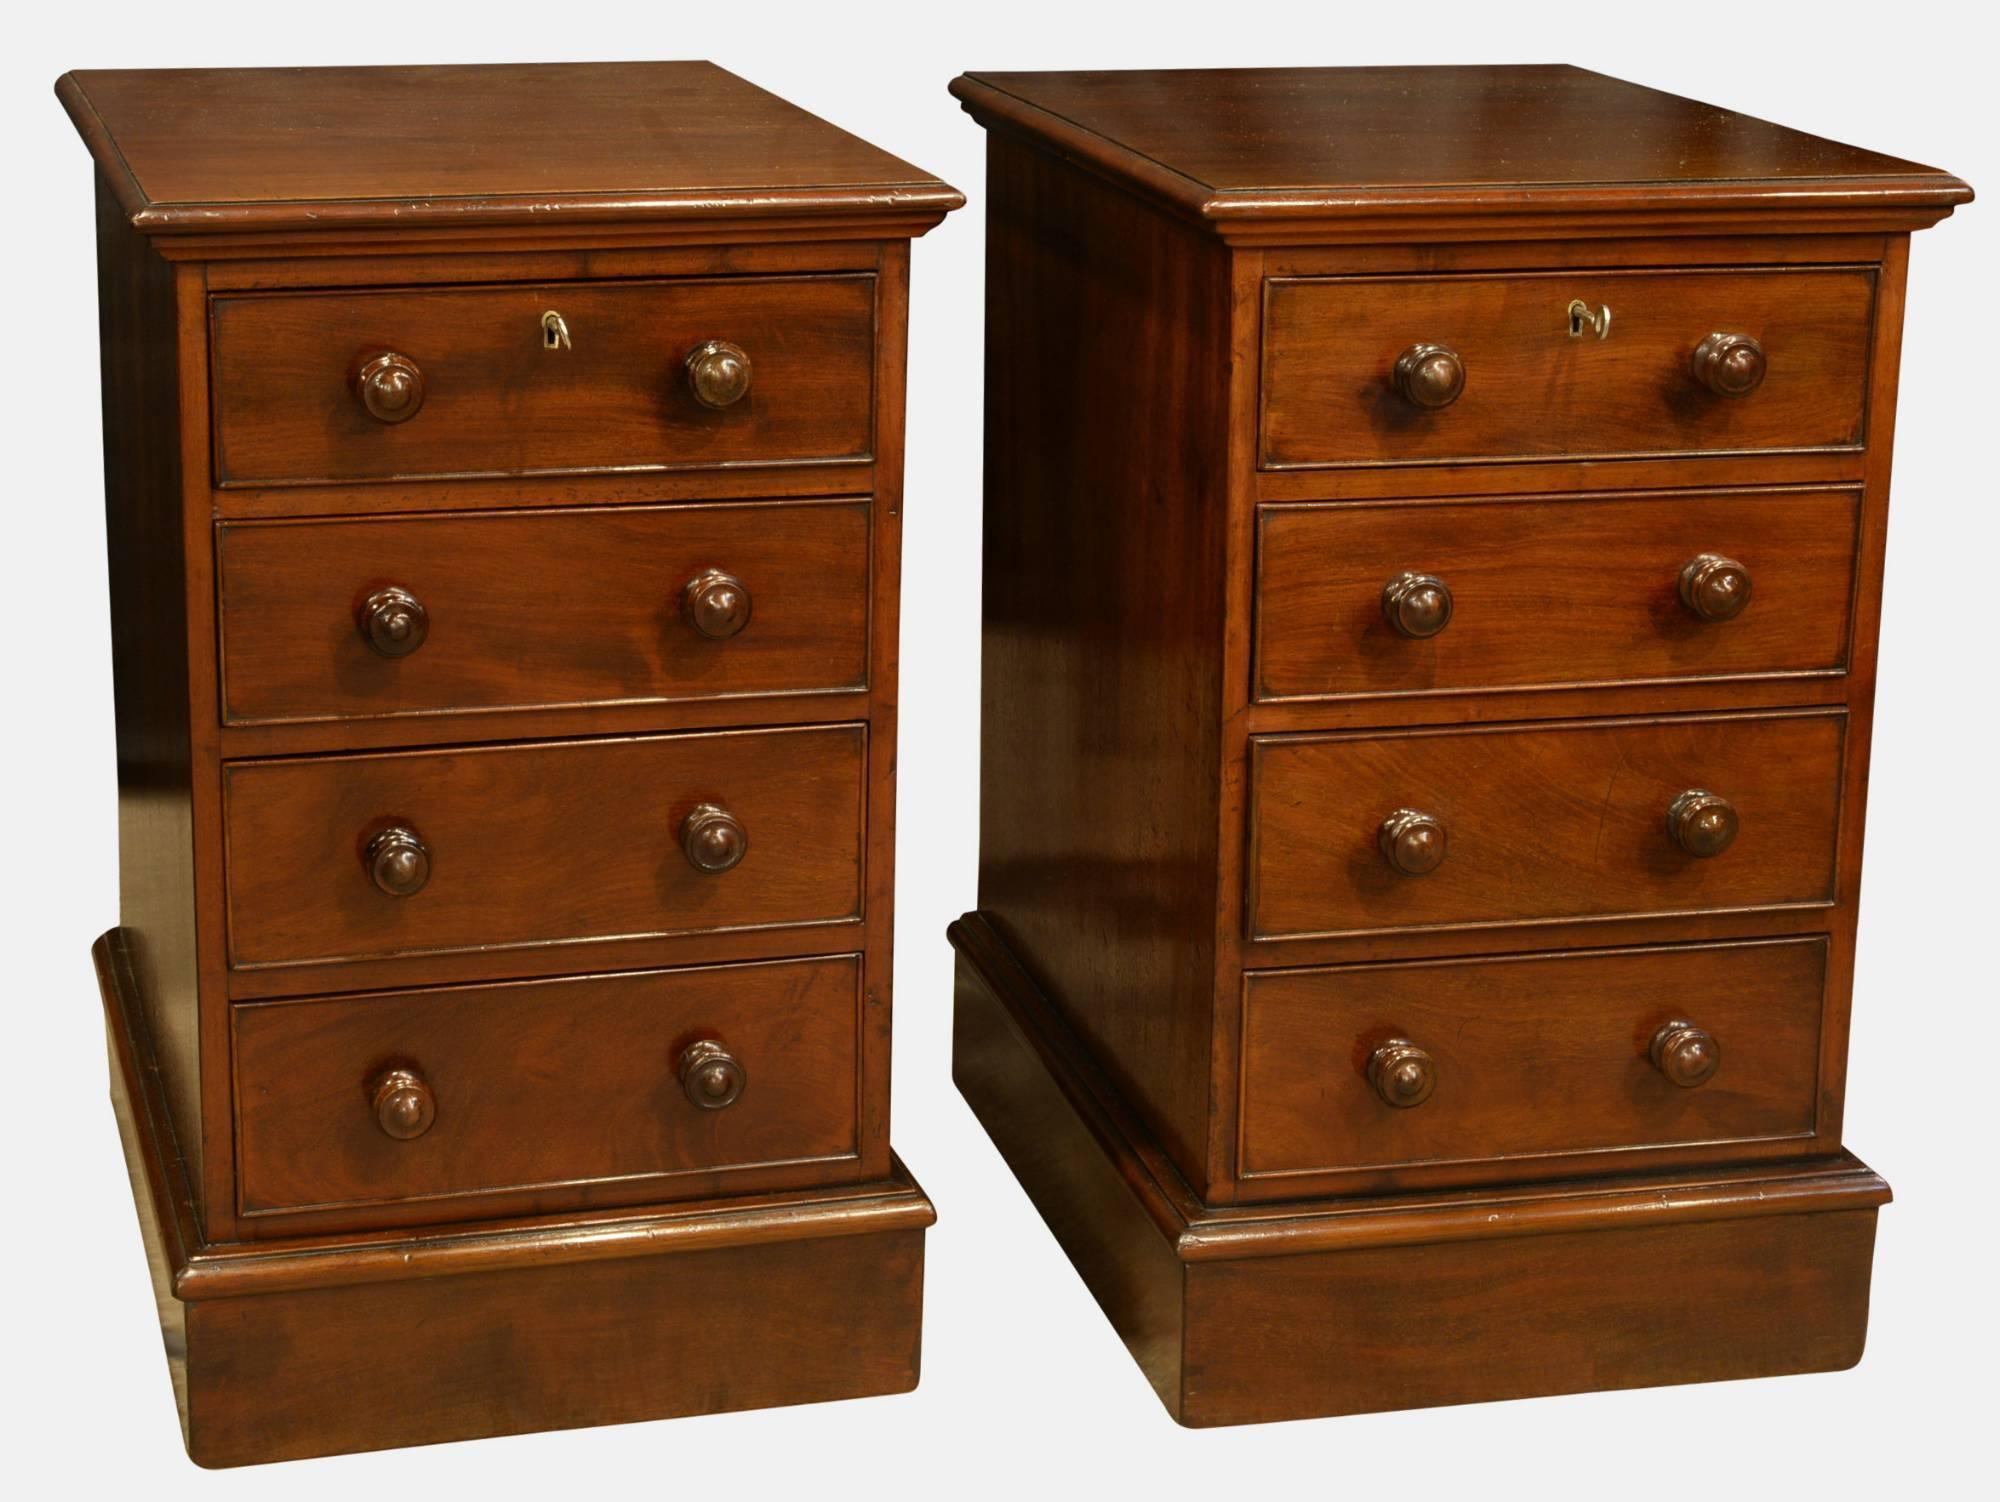 Pair of early Victorian mahogany bedside chests,

circa 1860s.
  